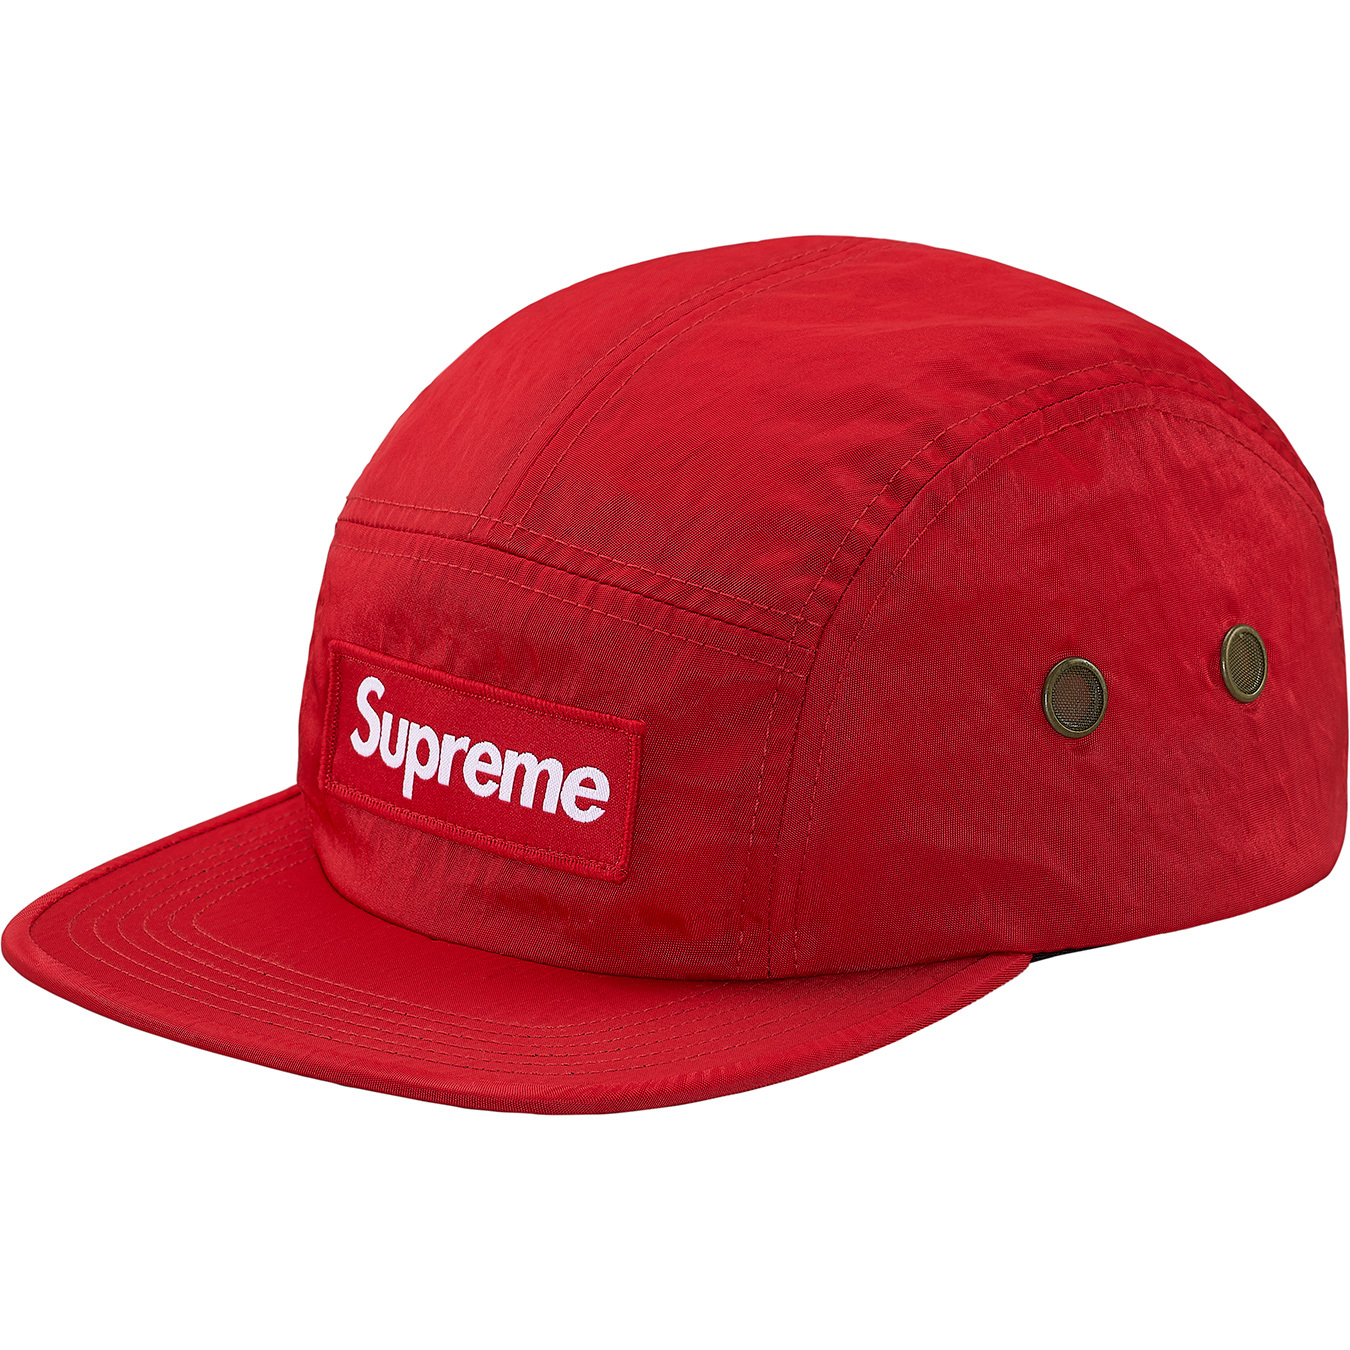 Supreme Washed Nylon Camp Cap Red - FW17 - US